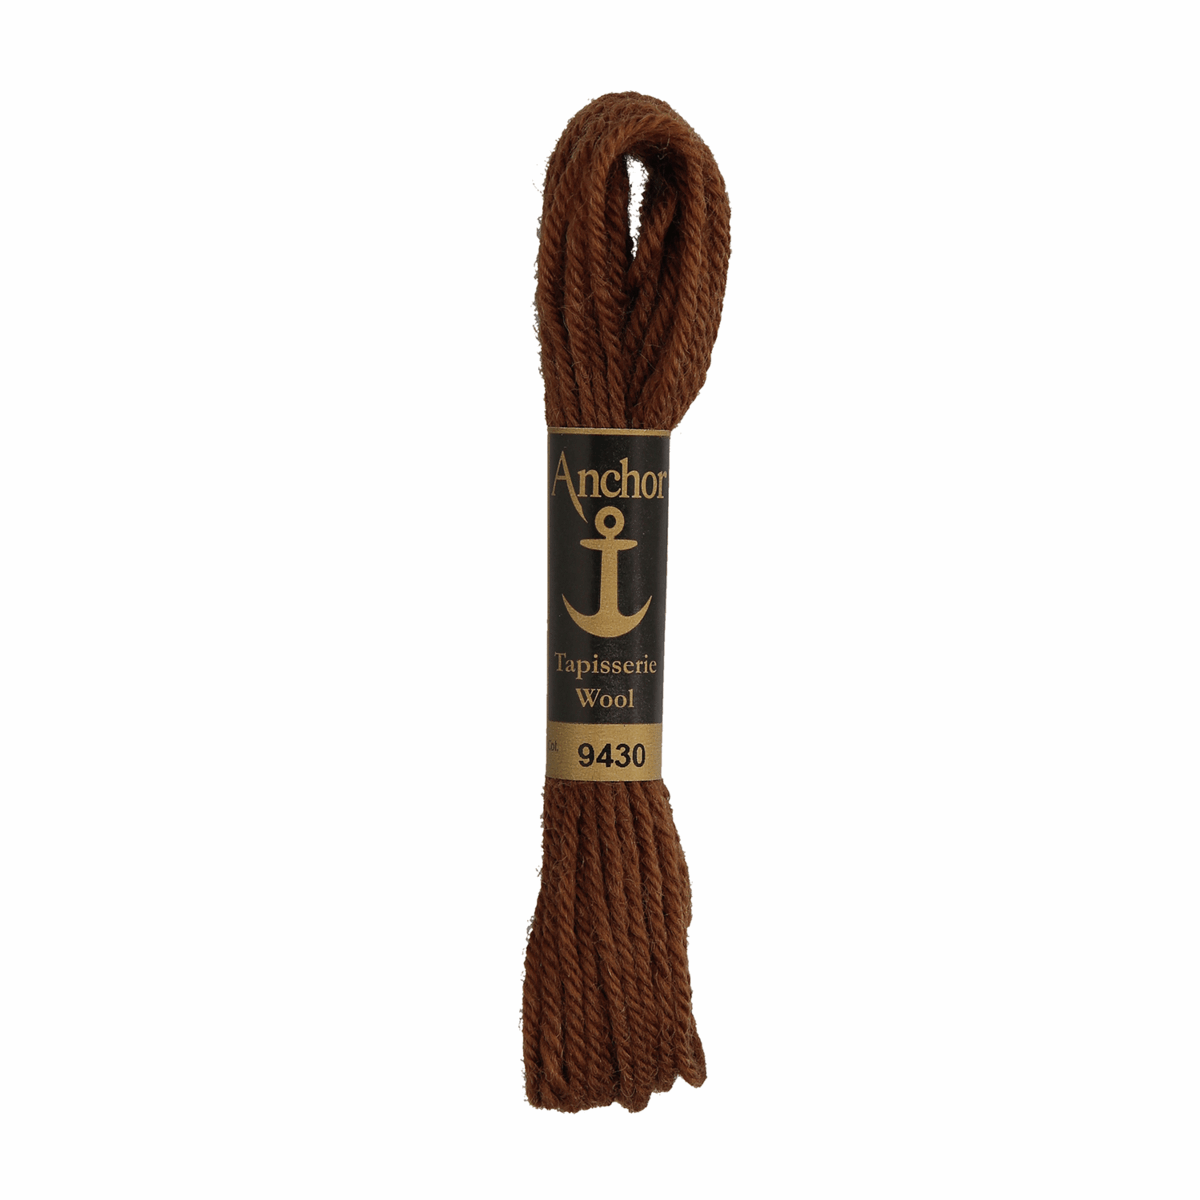 Anchor Tapestry Wool - Shade 9430 - 10m